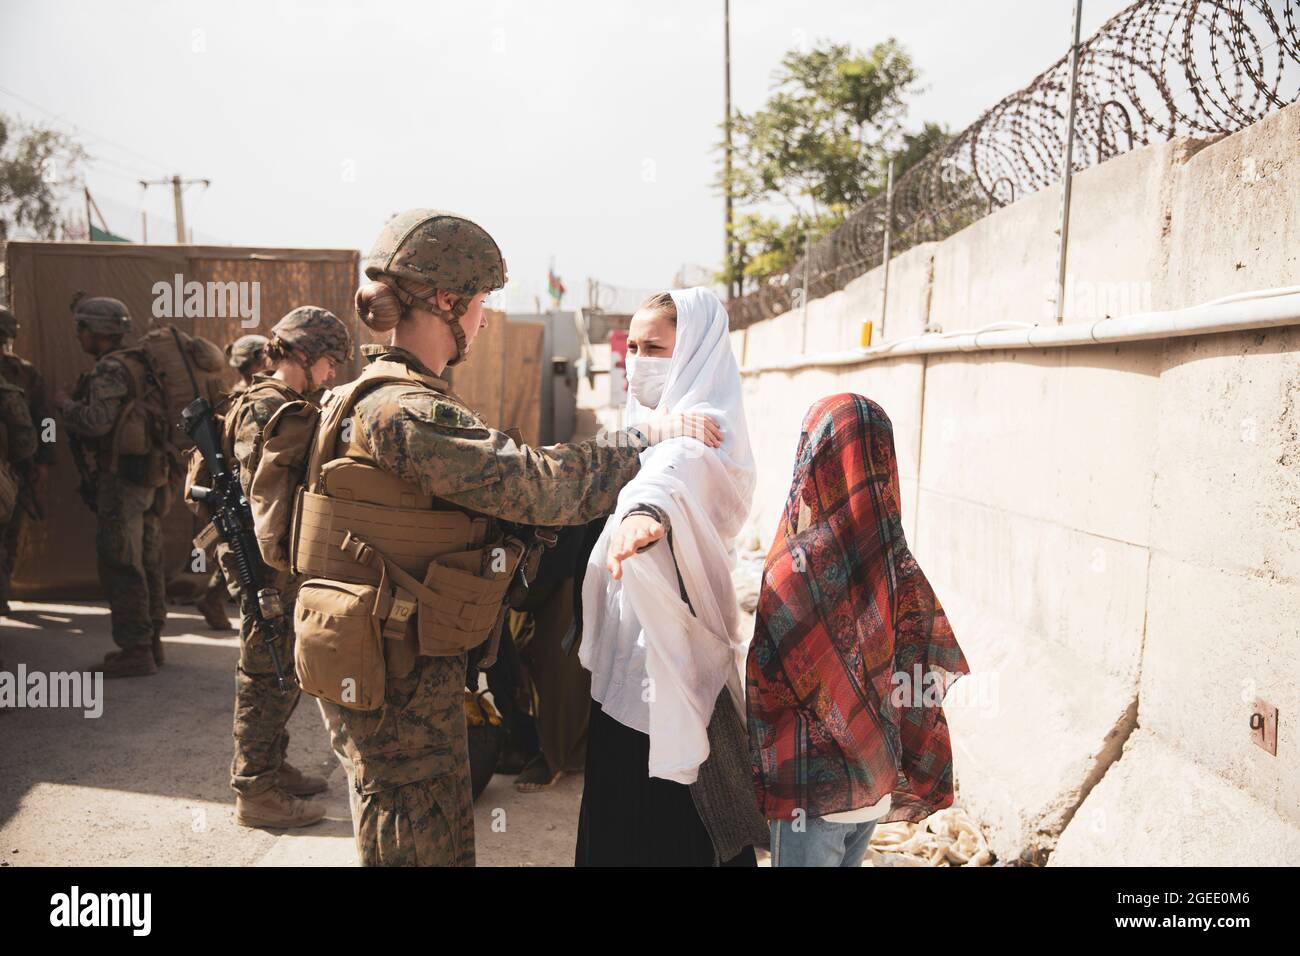 Kabul, Afghanistan. 18th Aug, 2021. U.S. Marines check civilians during processing for evacuation at Hamid Karzai International Airport as part of Operation Allies Refuge August 18, 2021 in Kabul, Afghanistan. Credit: Planetpix/Alamy Live News Stock Photo